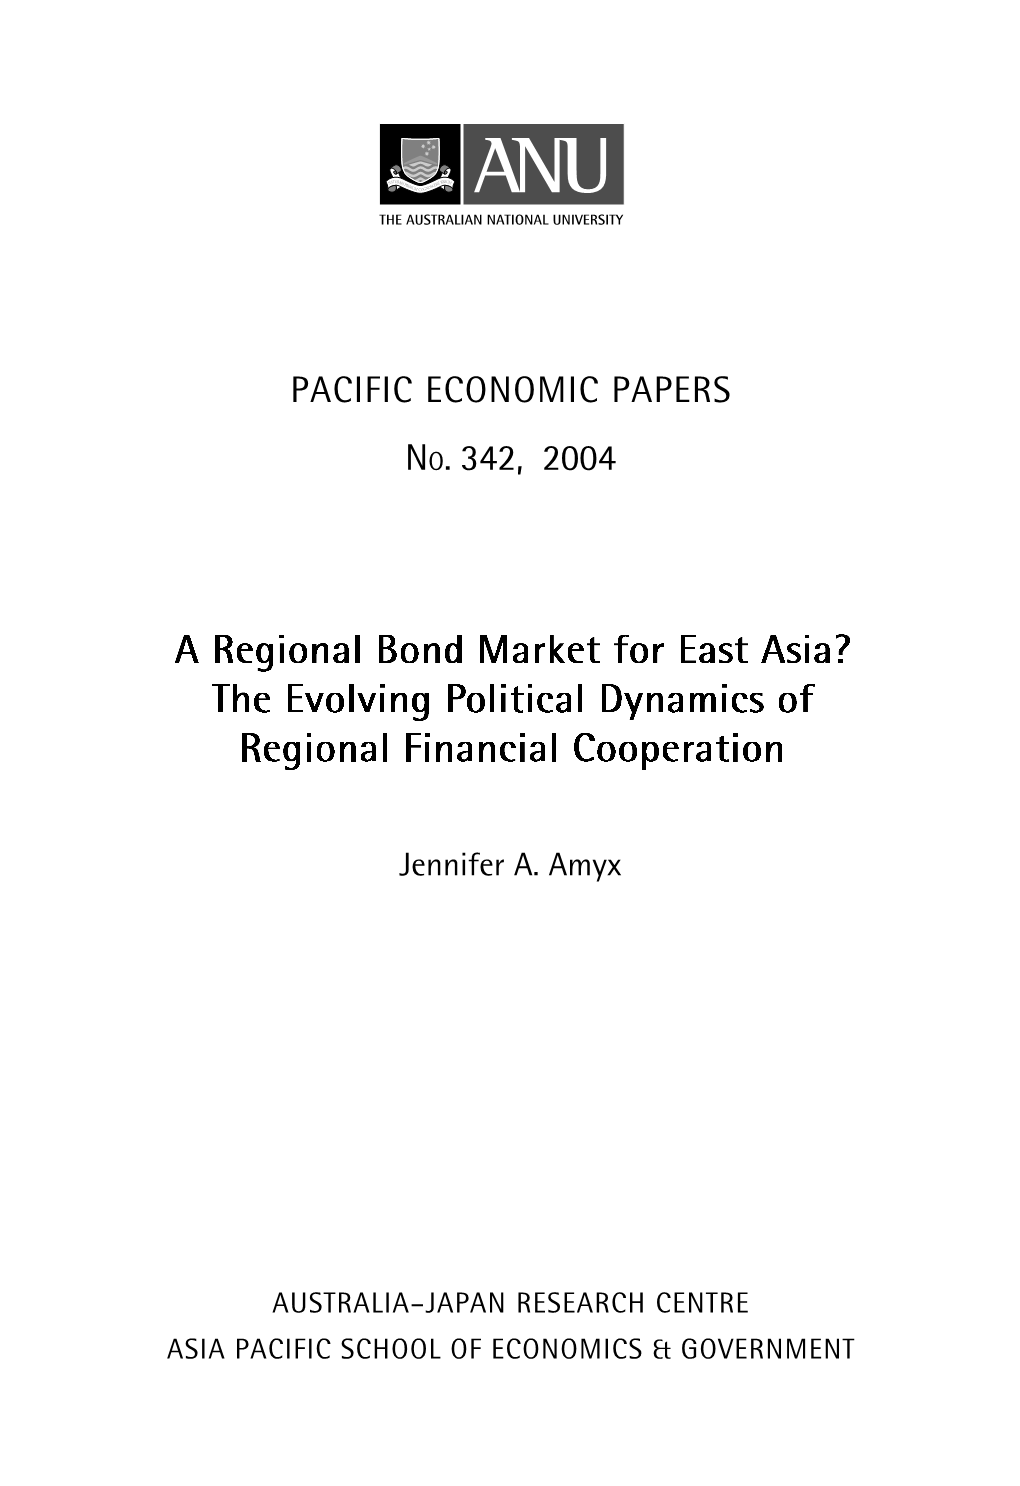 A Regional Bond Market for East Asia? the Evolving Political Dynamics of Regional Financial Cooperation